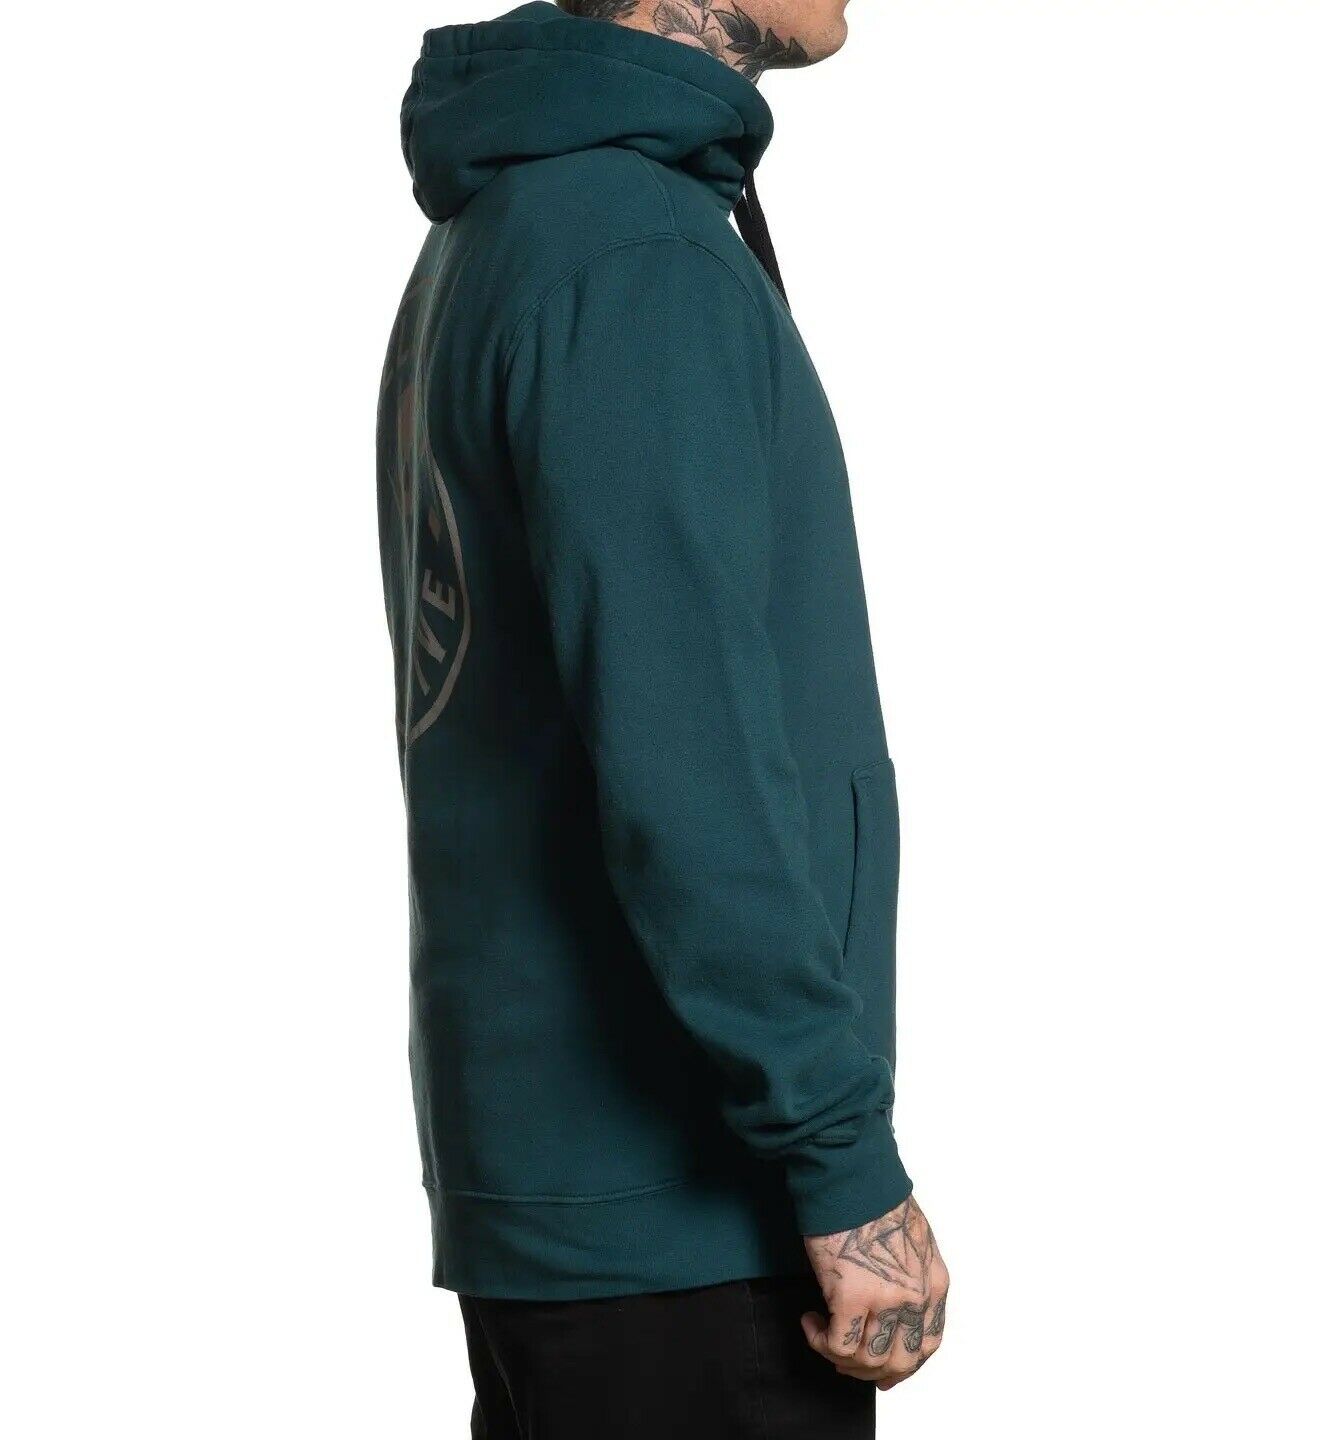 SULLEN CLOTHING EVER BOH SEA MOSS GREEN PULLOVER HOODIE